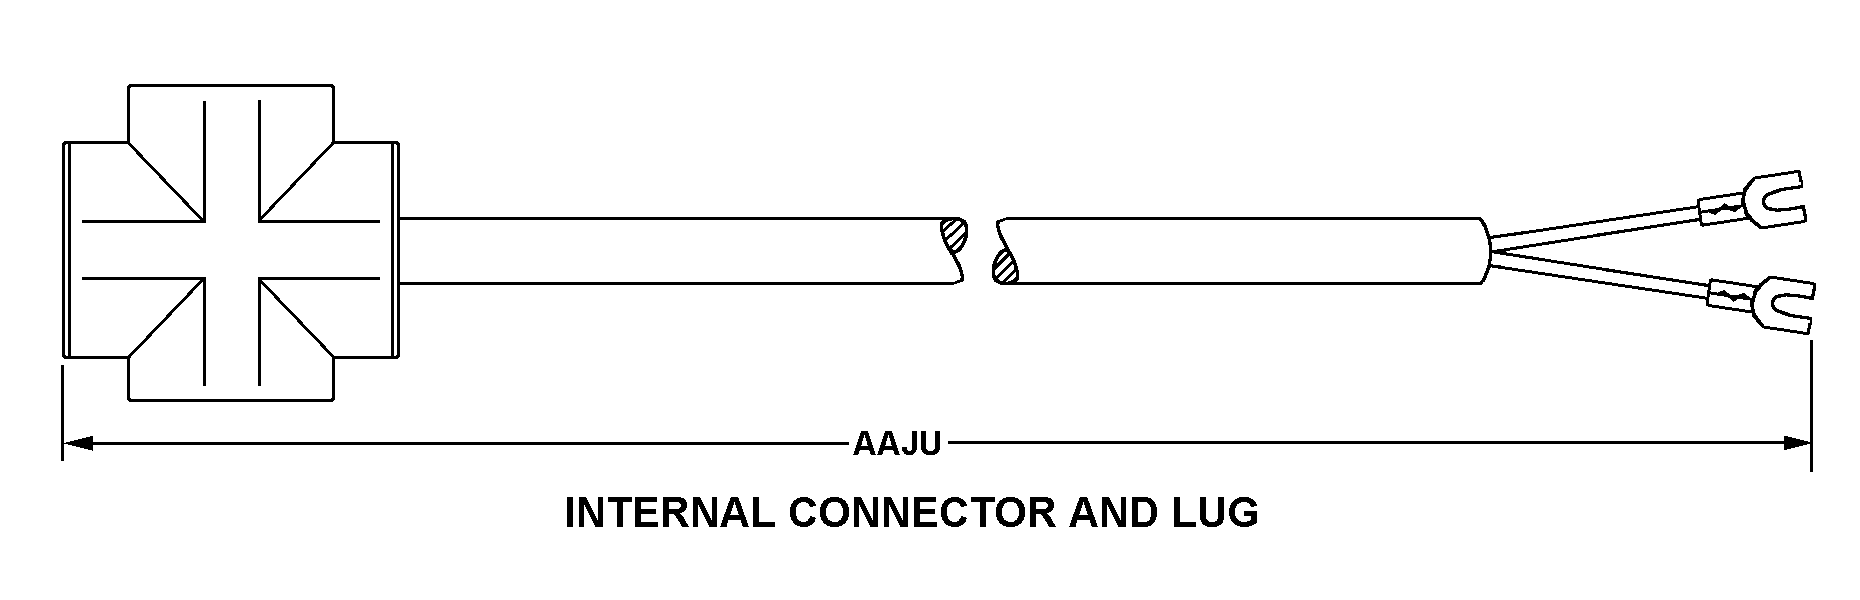 INTERNAL CONNECTOR AND LUG style nsn 6150-01-110-4493